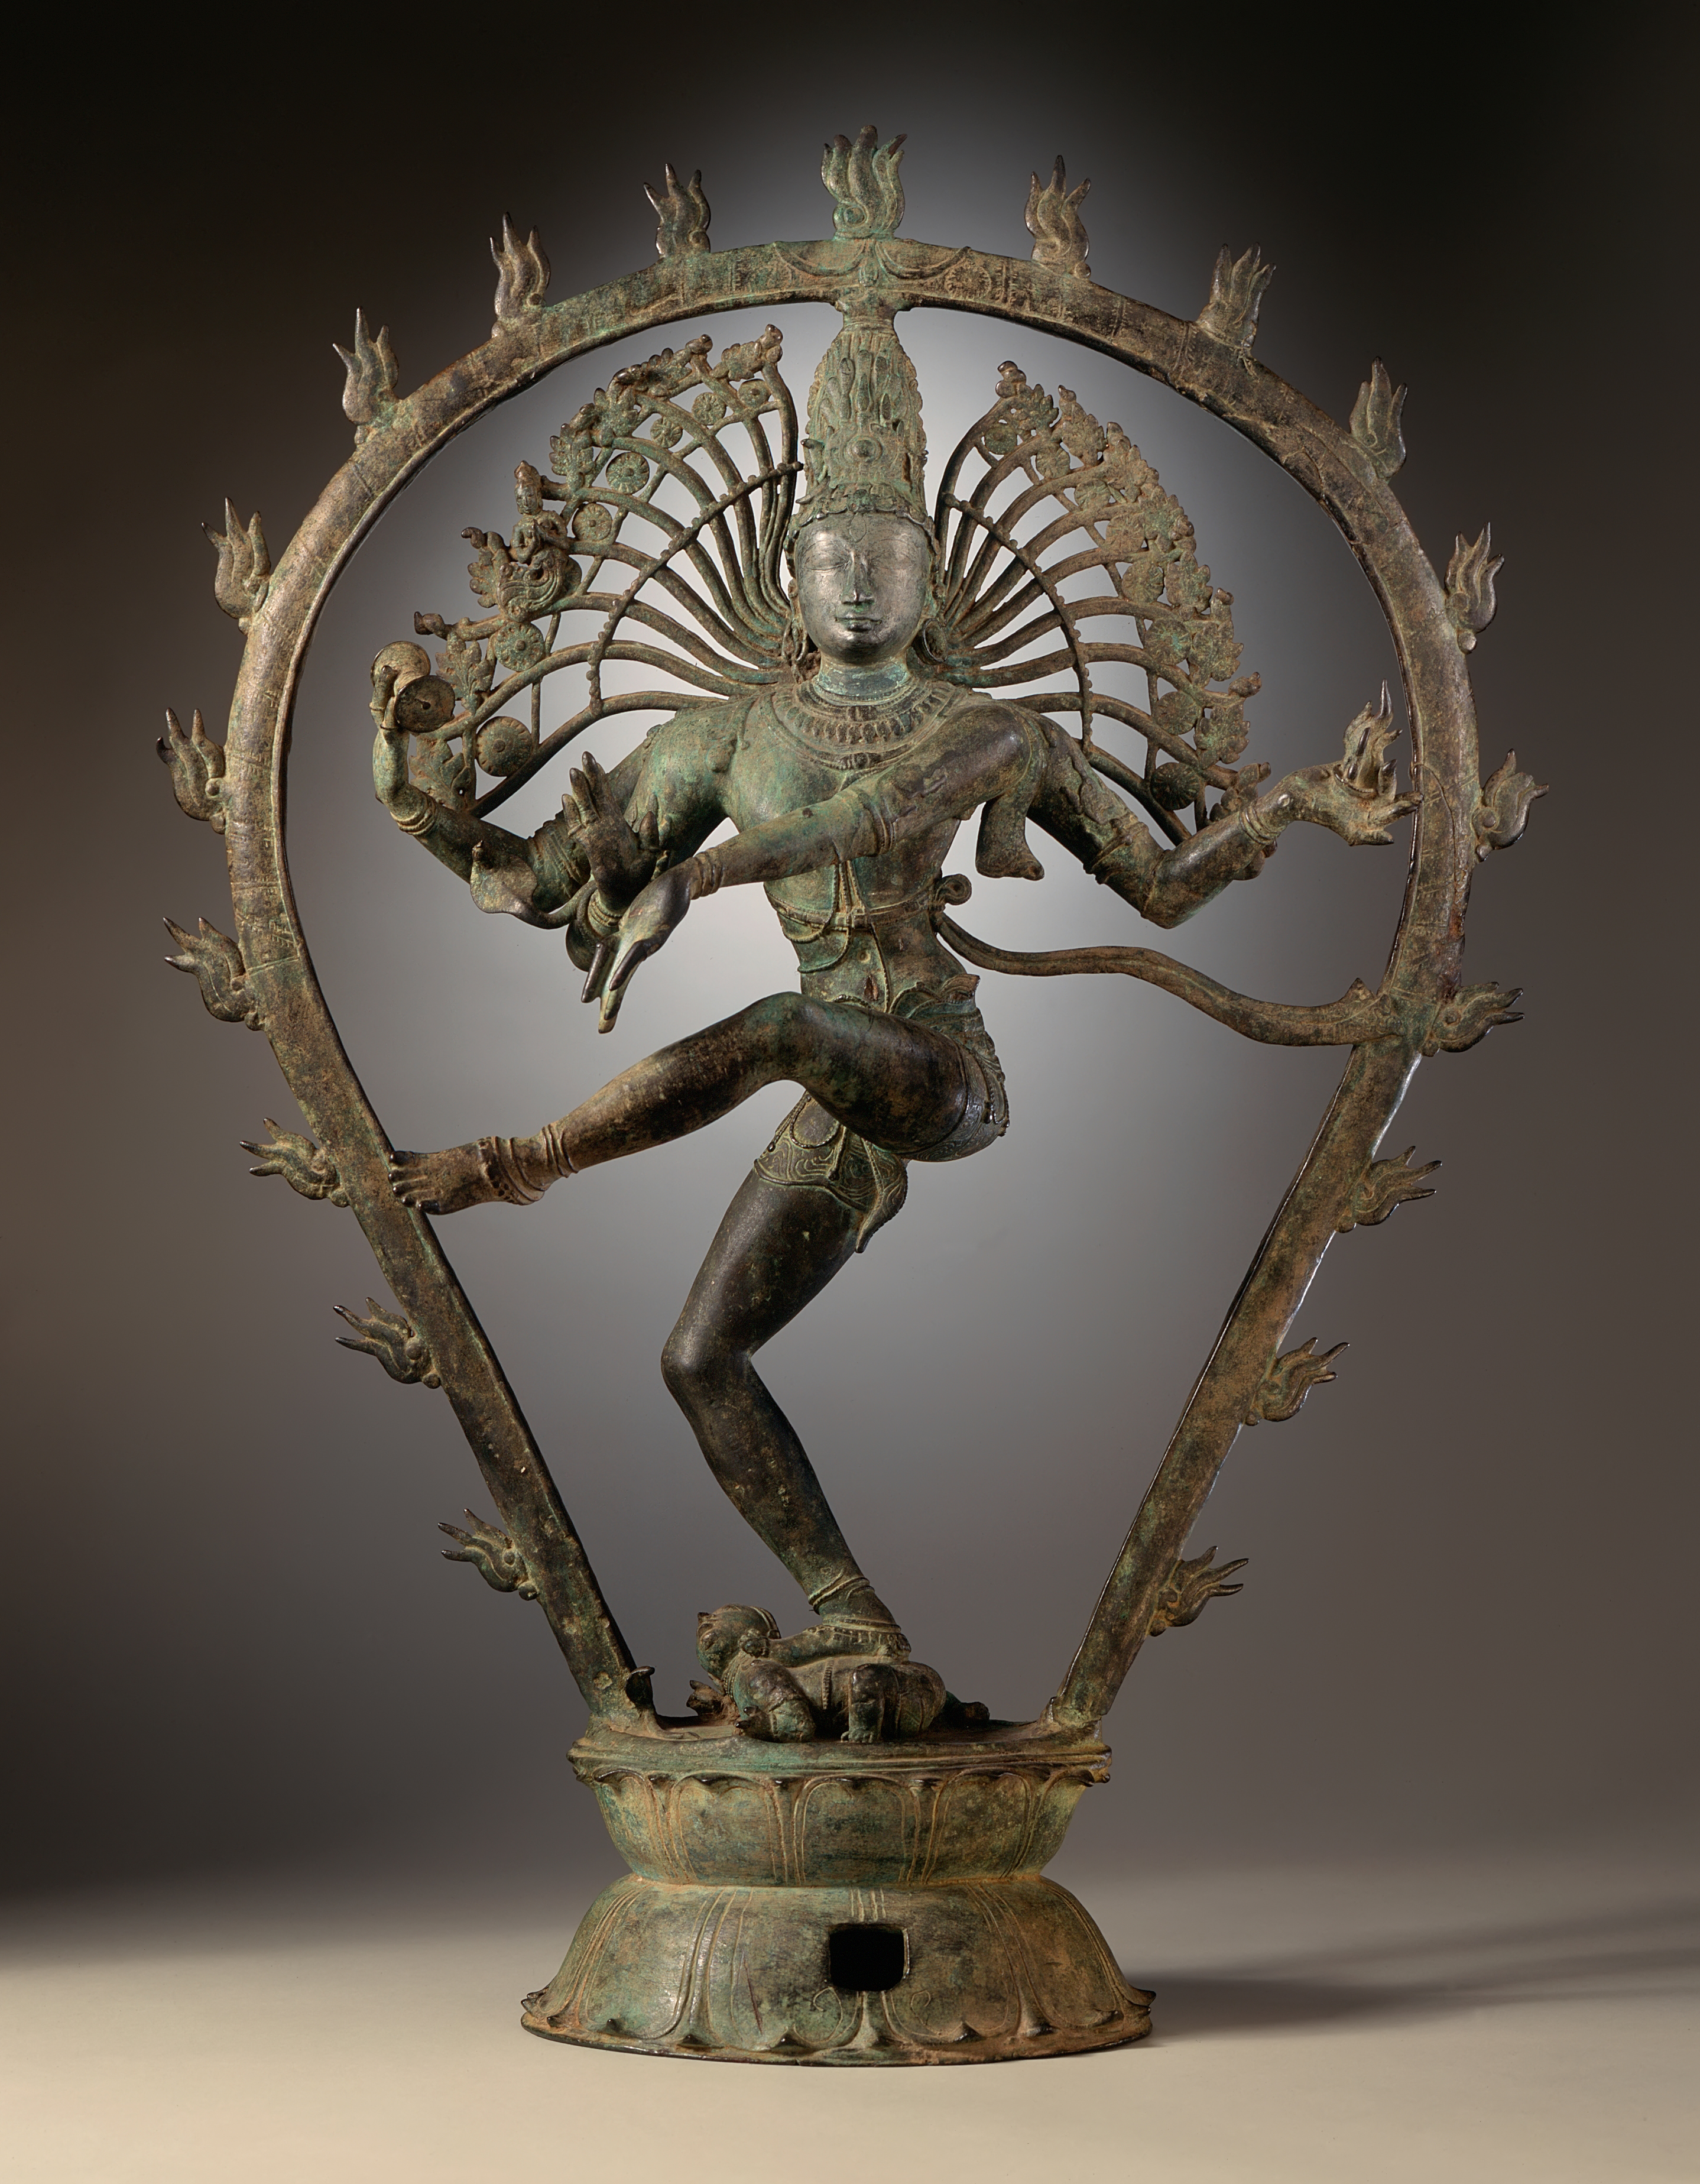 shiva_as_the_lord_of_dance_lacma_edit